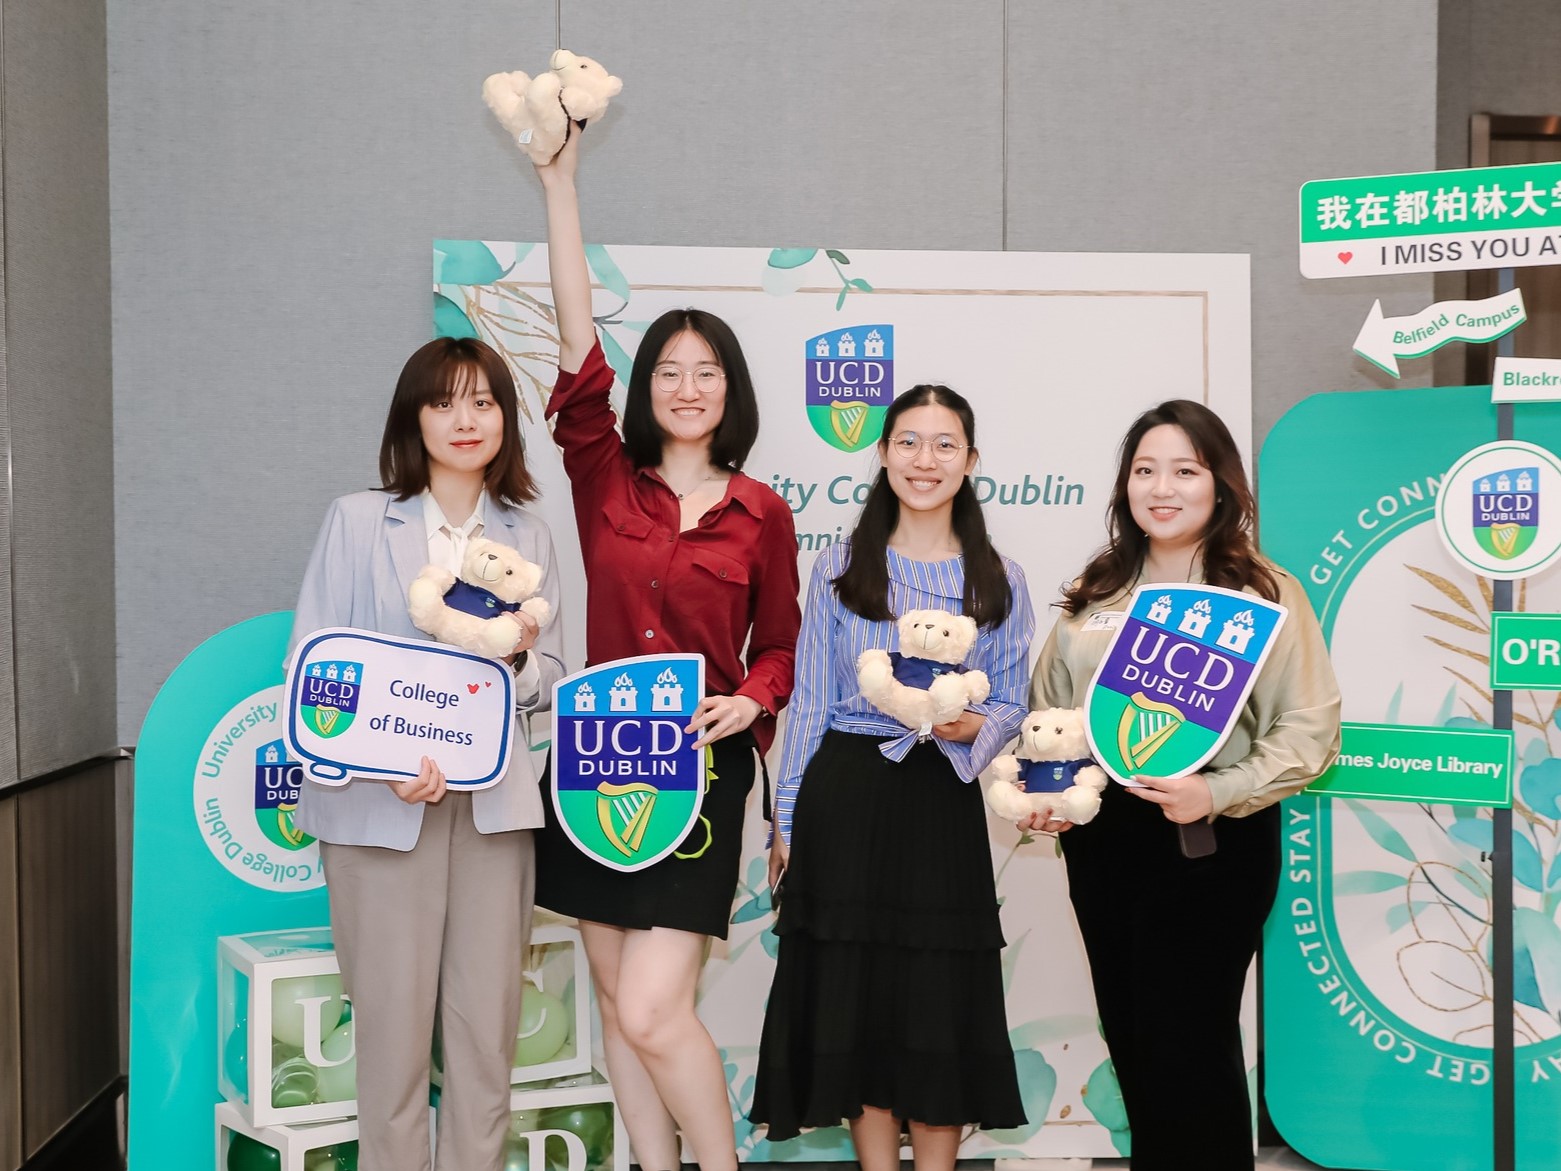 Four alumni posing with UCD signs and memorabilia.